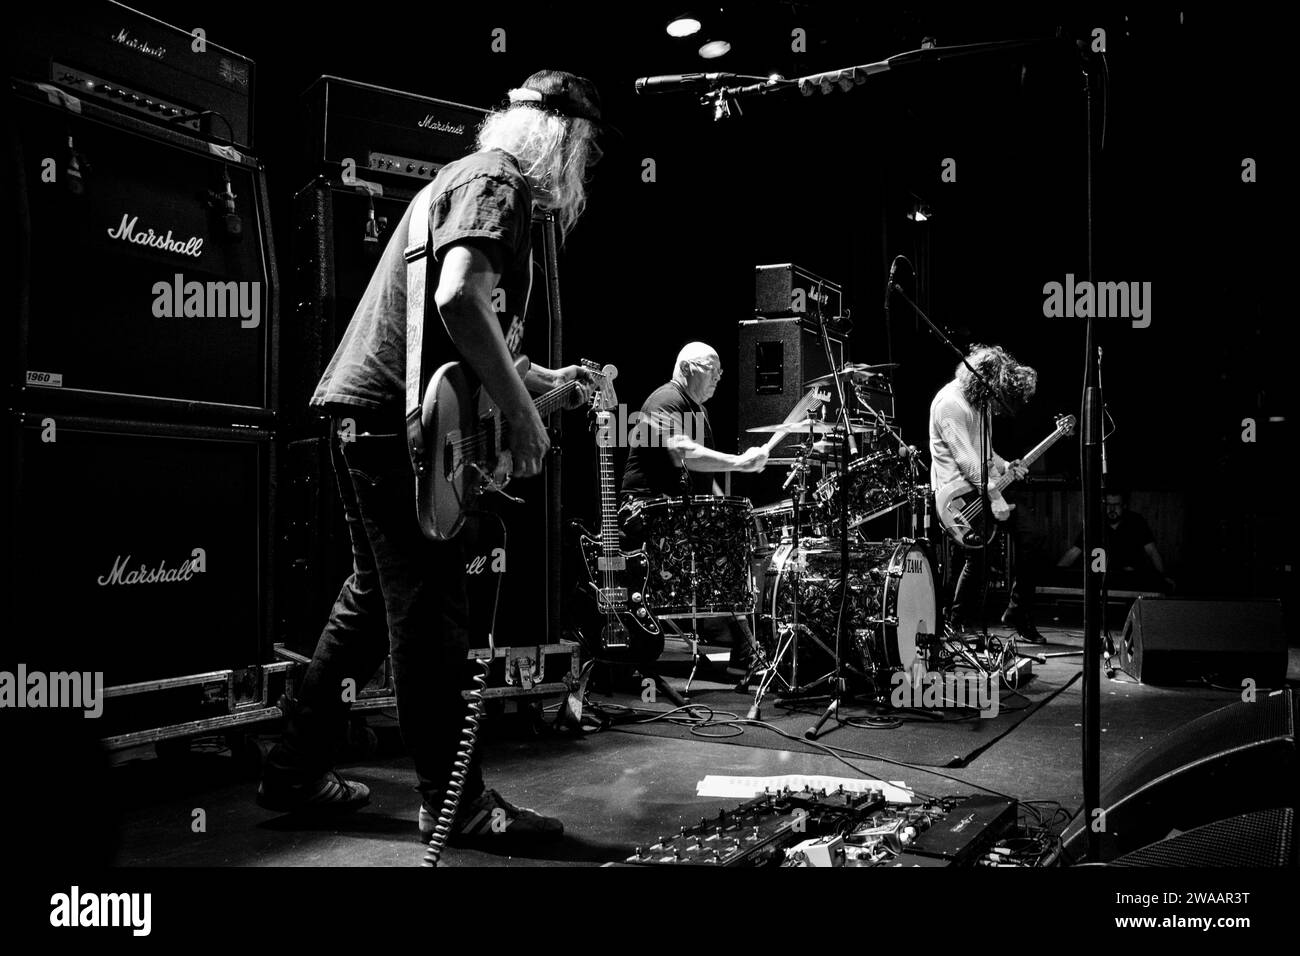 Dinosaur Jr performing at Glasgow's QMU in 2022. J Mascis is playing Guitar and Bass guitar Stock Photo